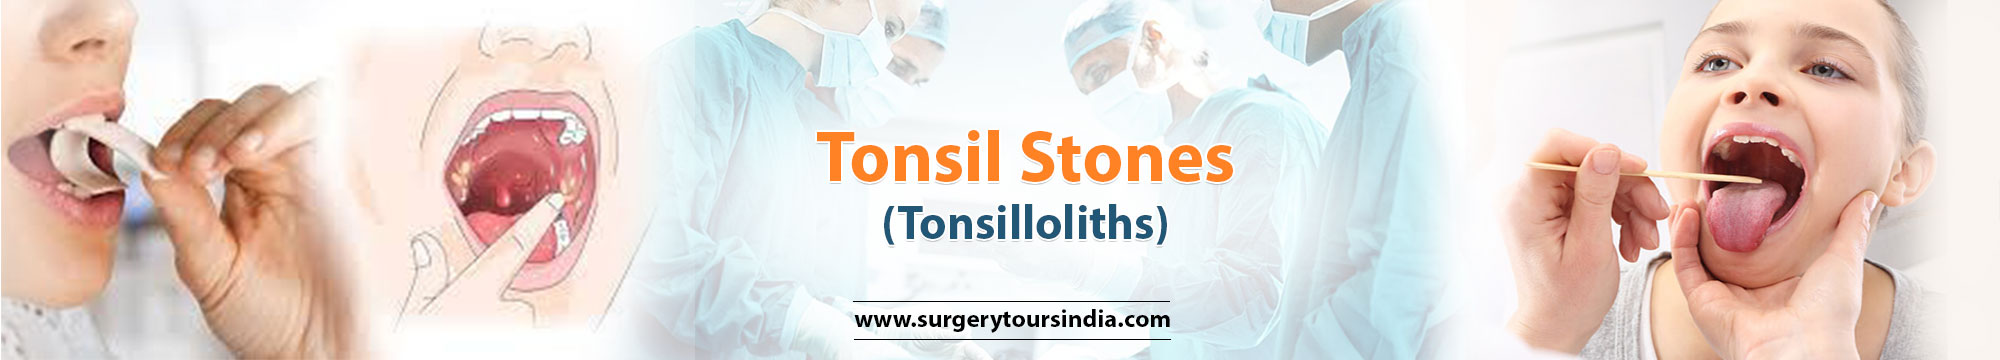 guide to tonsil stones treatment india